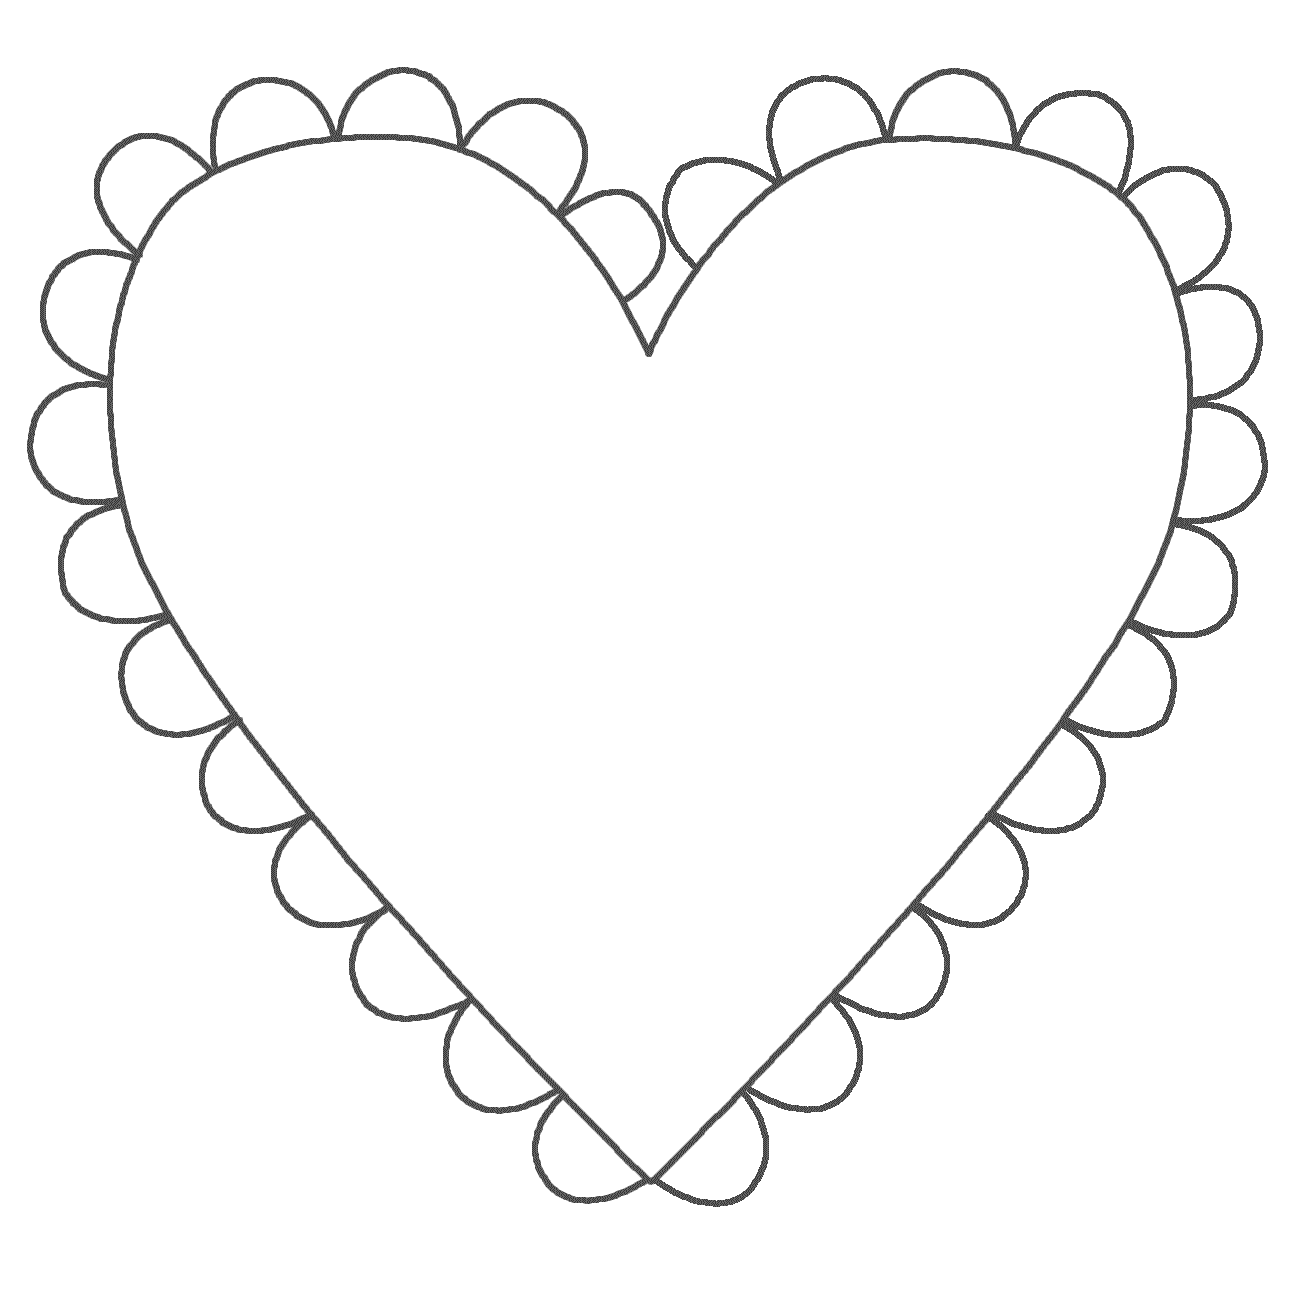 Free Heart Shapes Pictures Download Free Heart Shapes Pictures Png Images Free Cliparts On Clipart Library